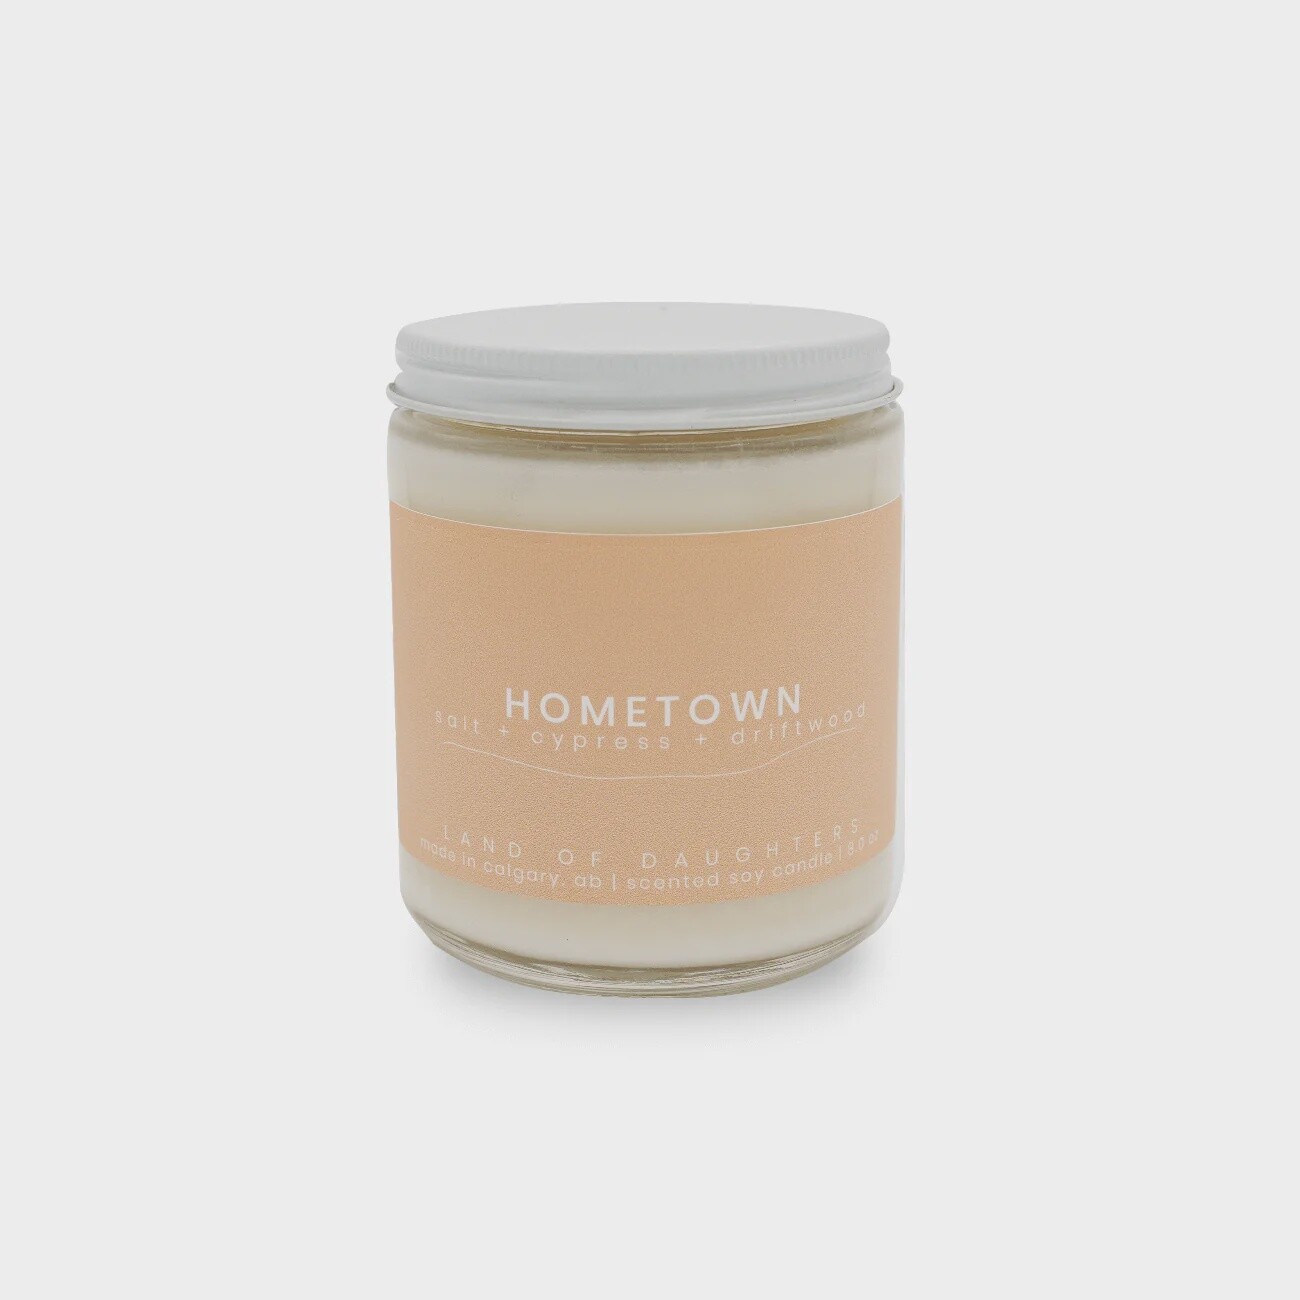 Hometown Candle